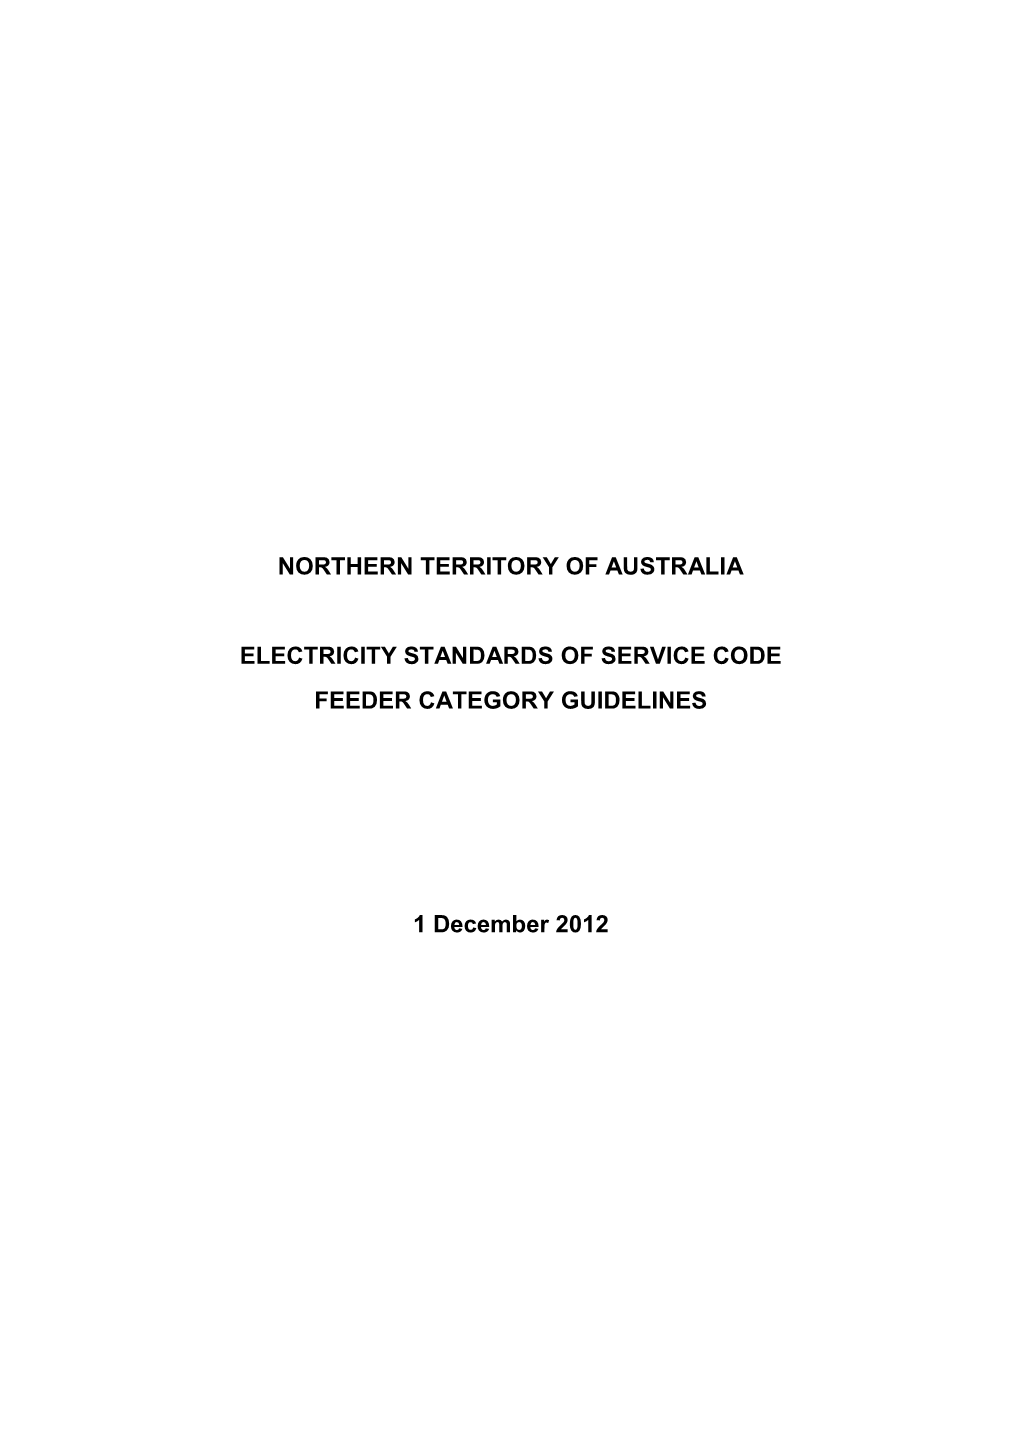 ESS Code Feeder Category Guidelines As at 1 December 2012